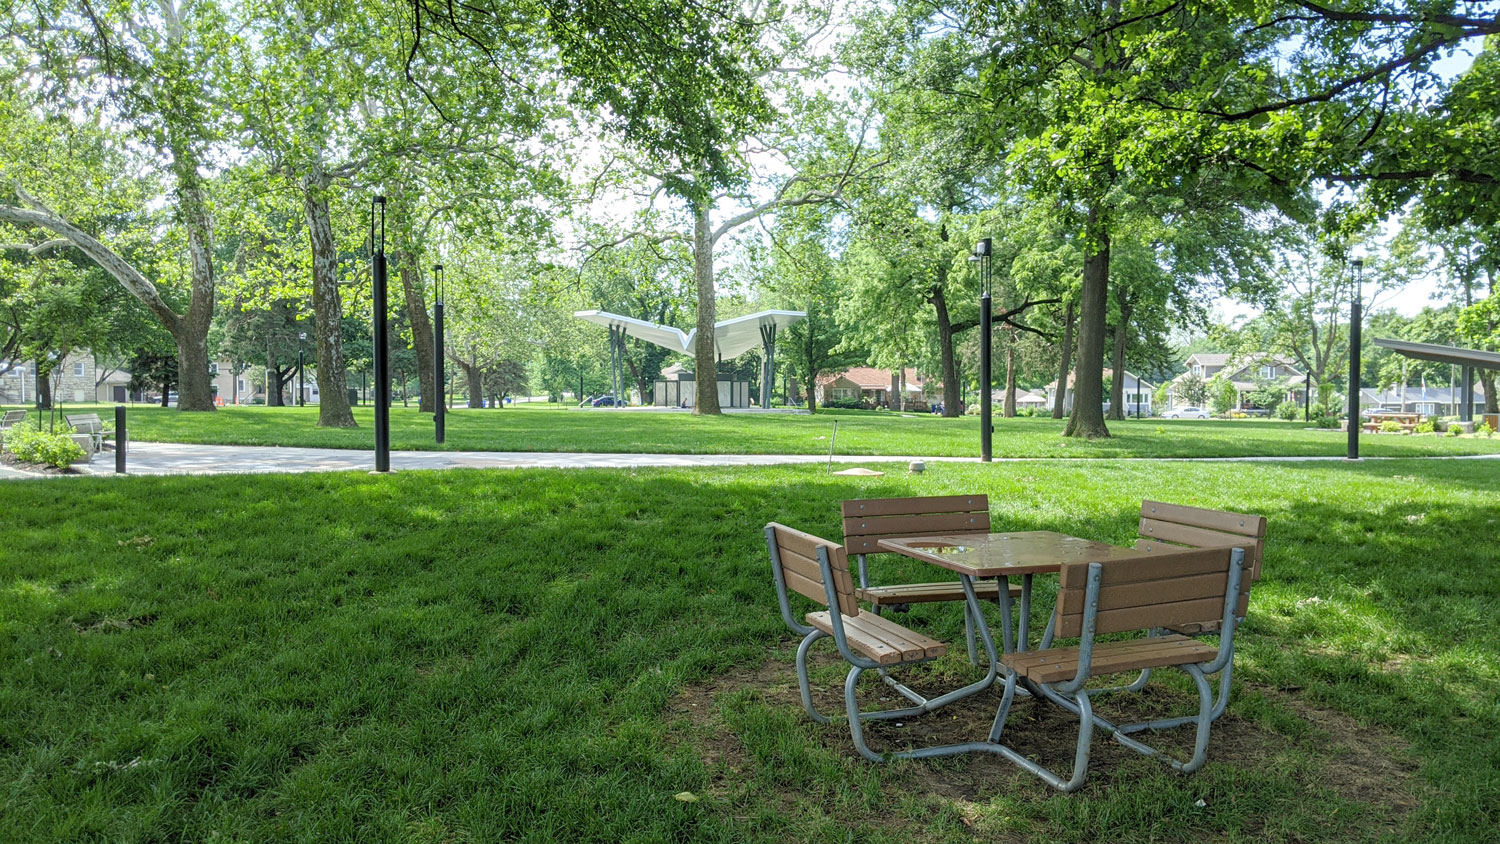 This is an image of downtown overland park thompson park green space table paper airplane lawn web